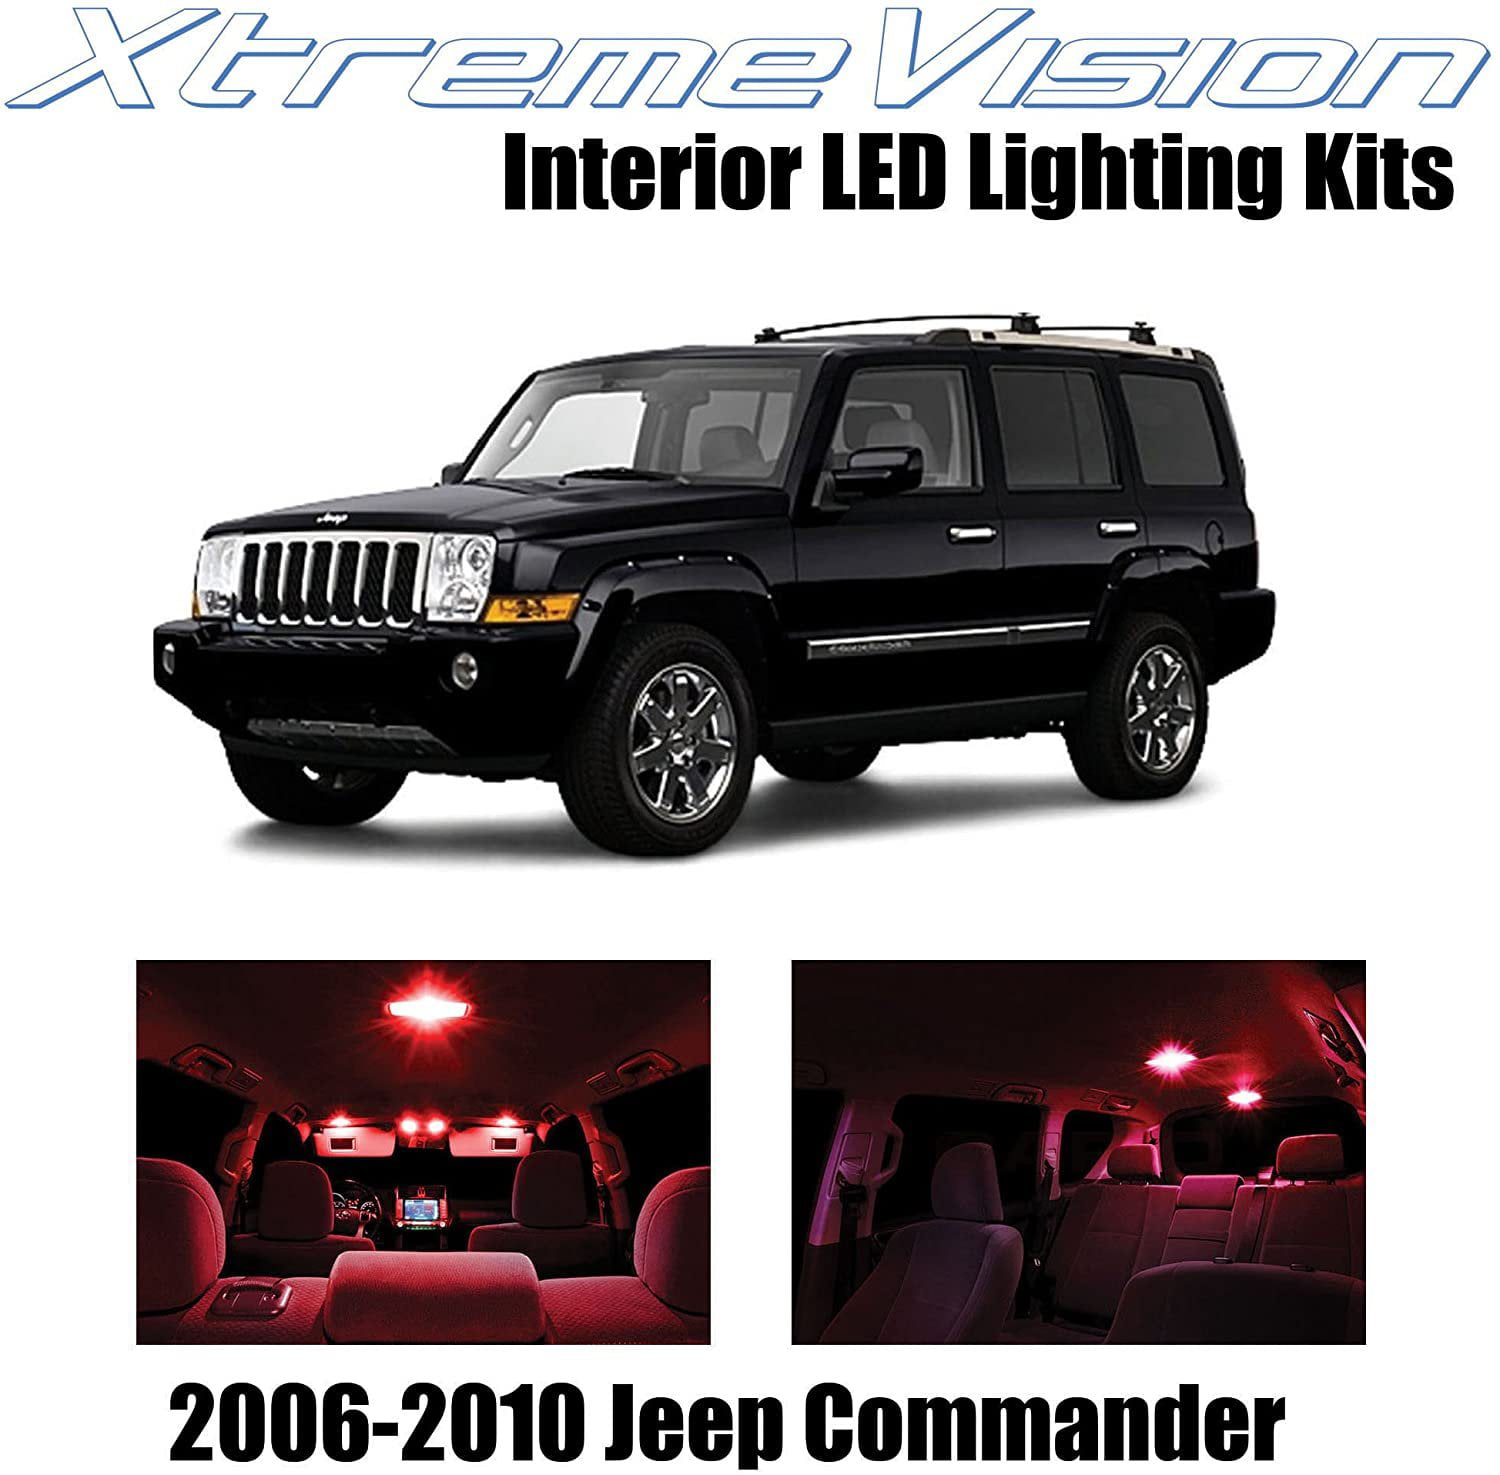 6 Pieces Cool White Interior LED Kit Installation Tool XtremeVision Interior LED for Jeep Commander 2006-2010 